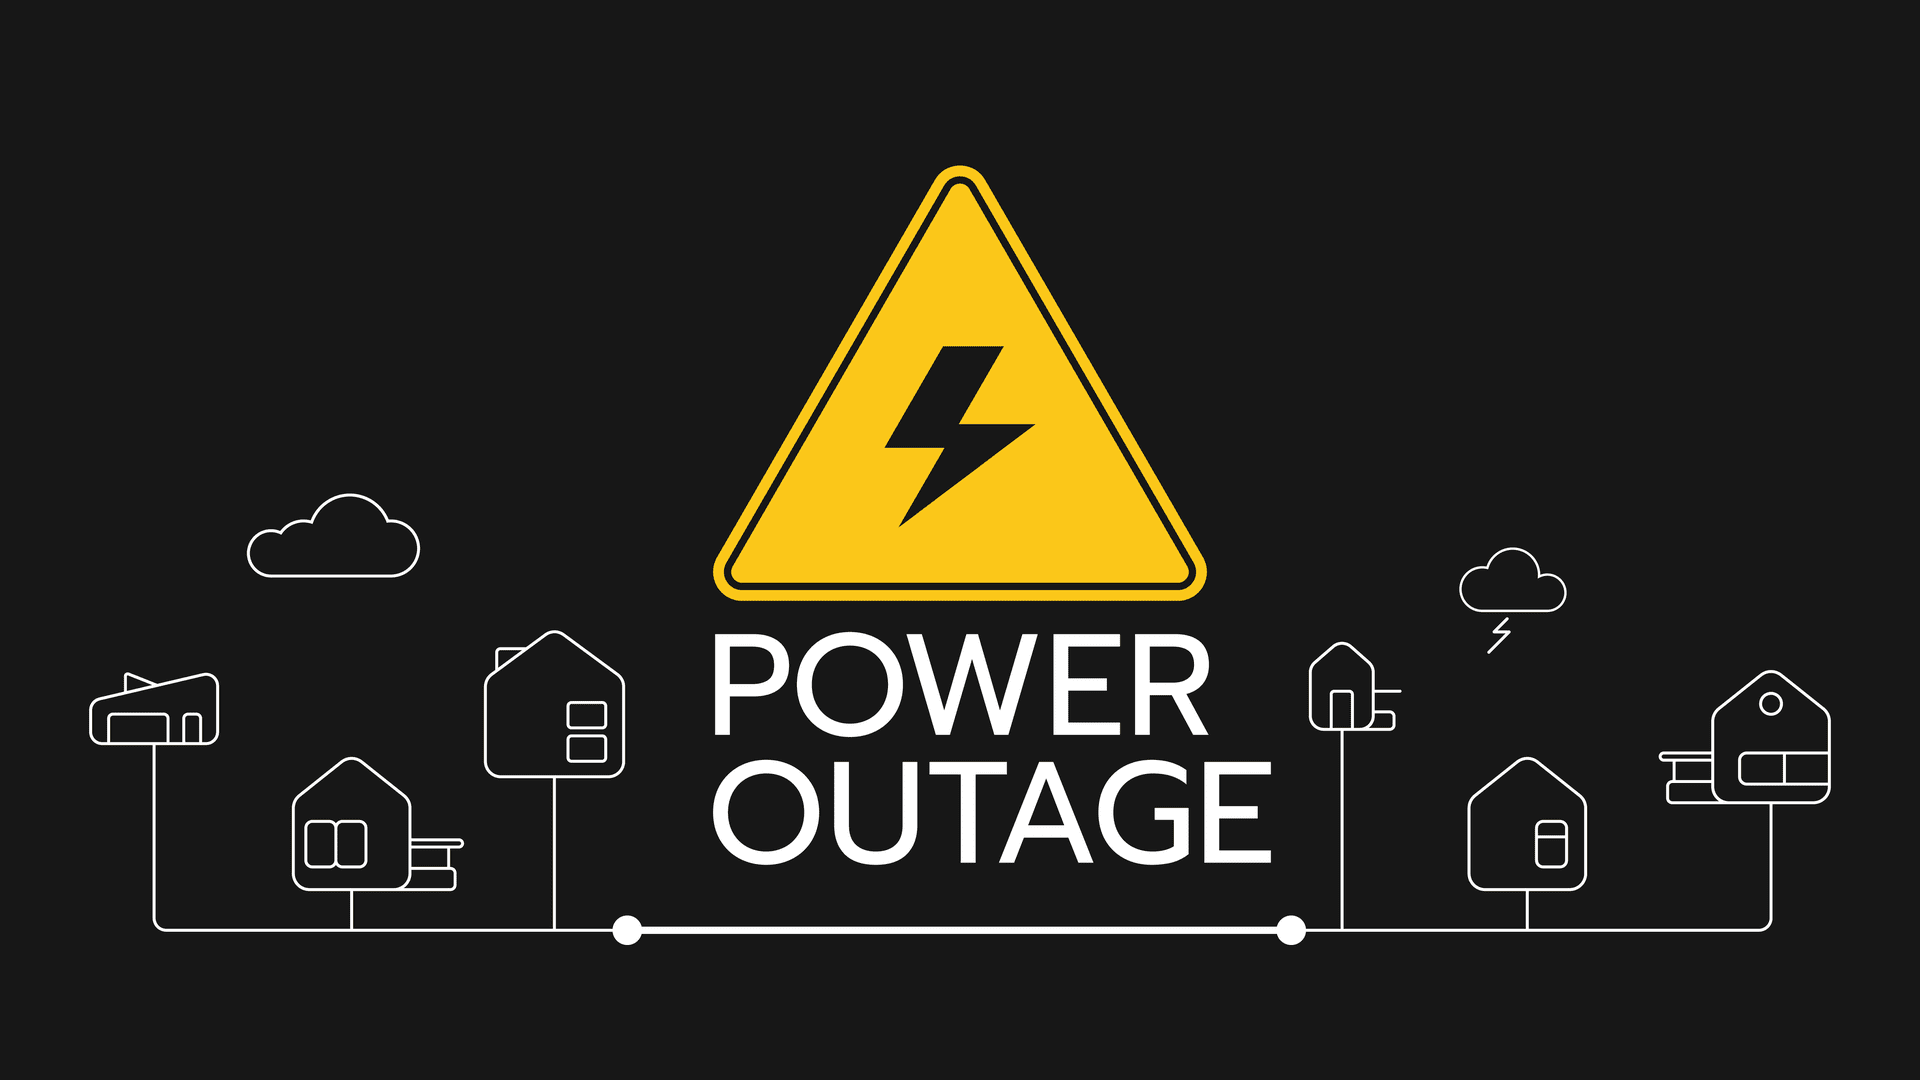 http://myslidell.com/wp-content/uploads/2021/04/Power-Outage.png